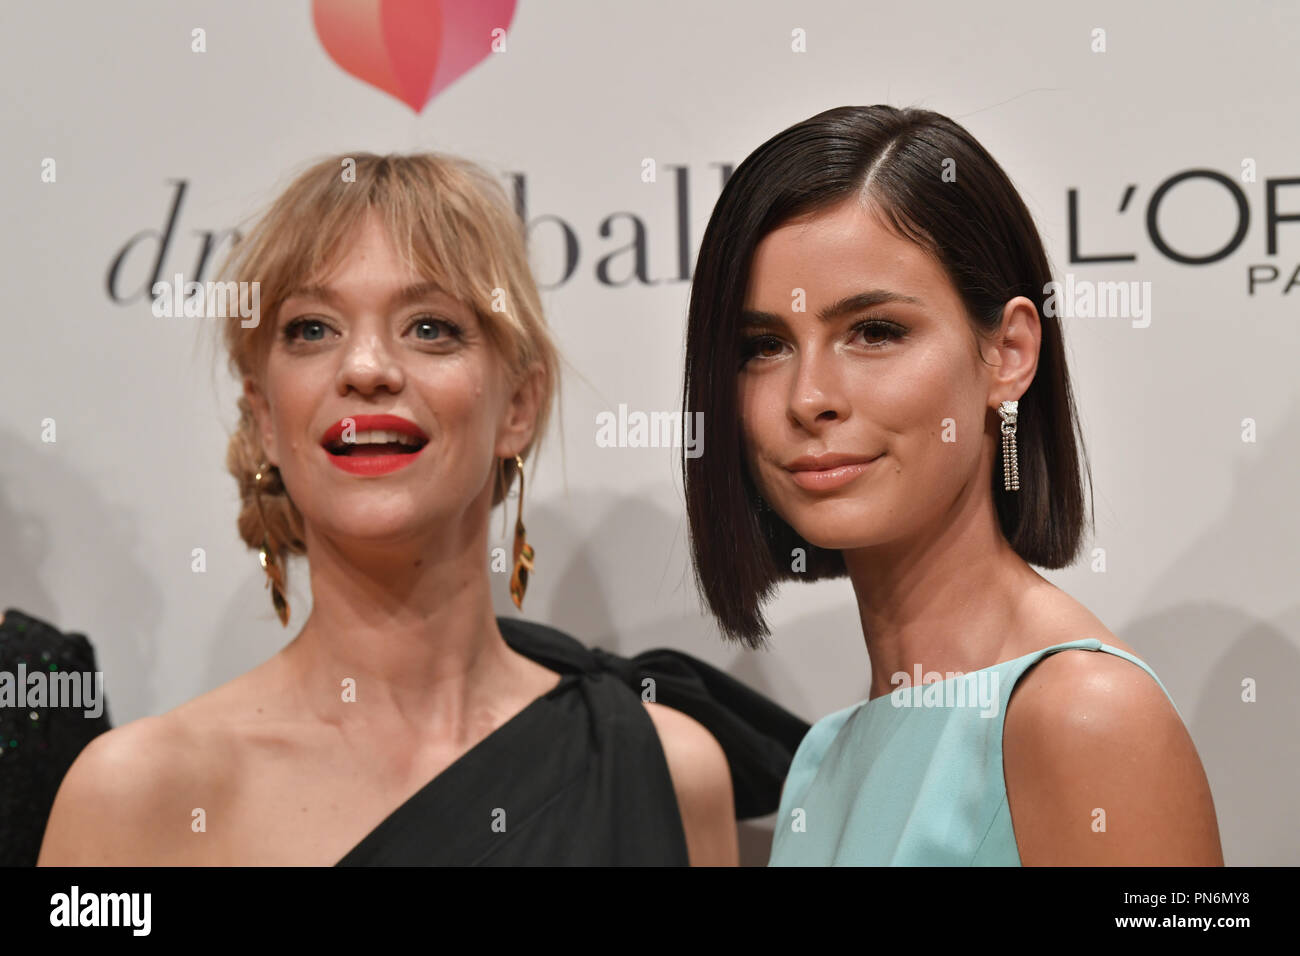 19 September 2018, Berlin: Heike Makatsch (l) and Lena Meyer-Landrut come to the charity gala 'Dreamball' at the Westhafen Event & Convention Center. Donations are collected for girls and women suffering from cancer. Photo: Jens Kalaene/dpa Stock Photo